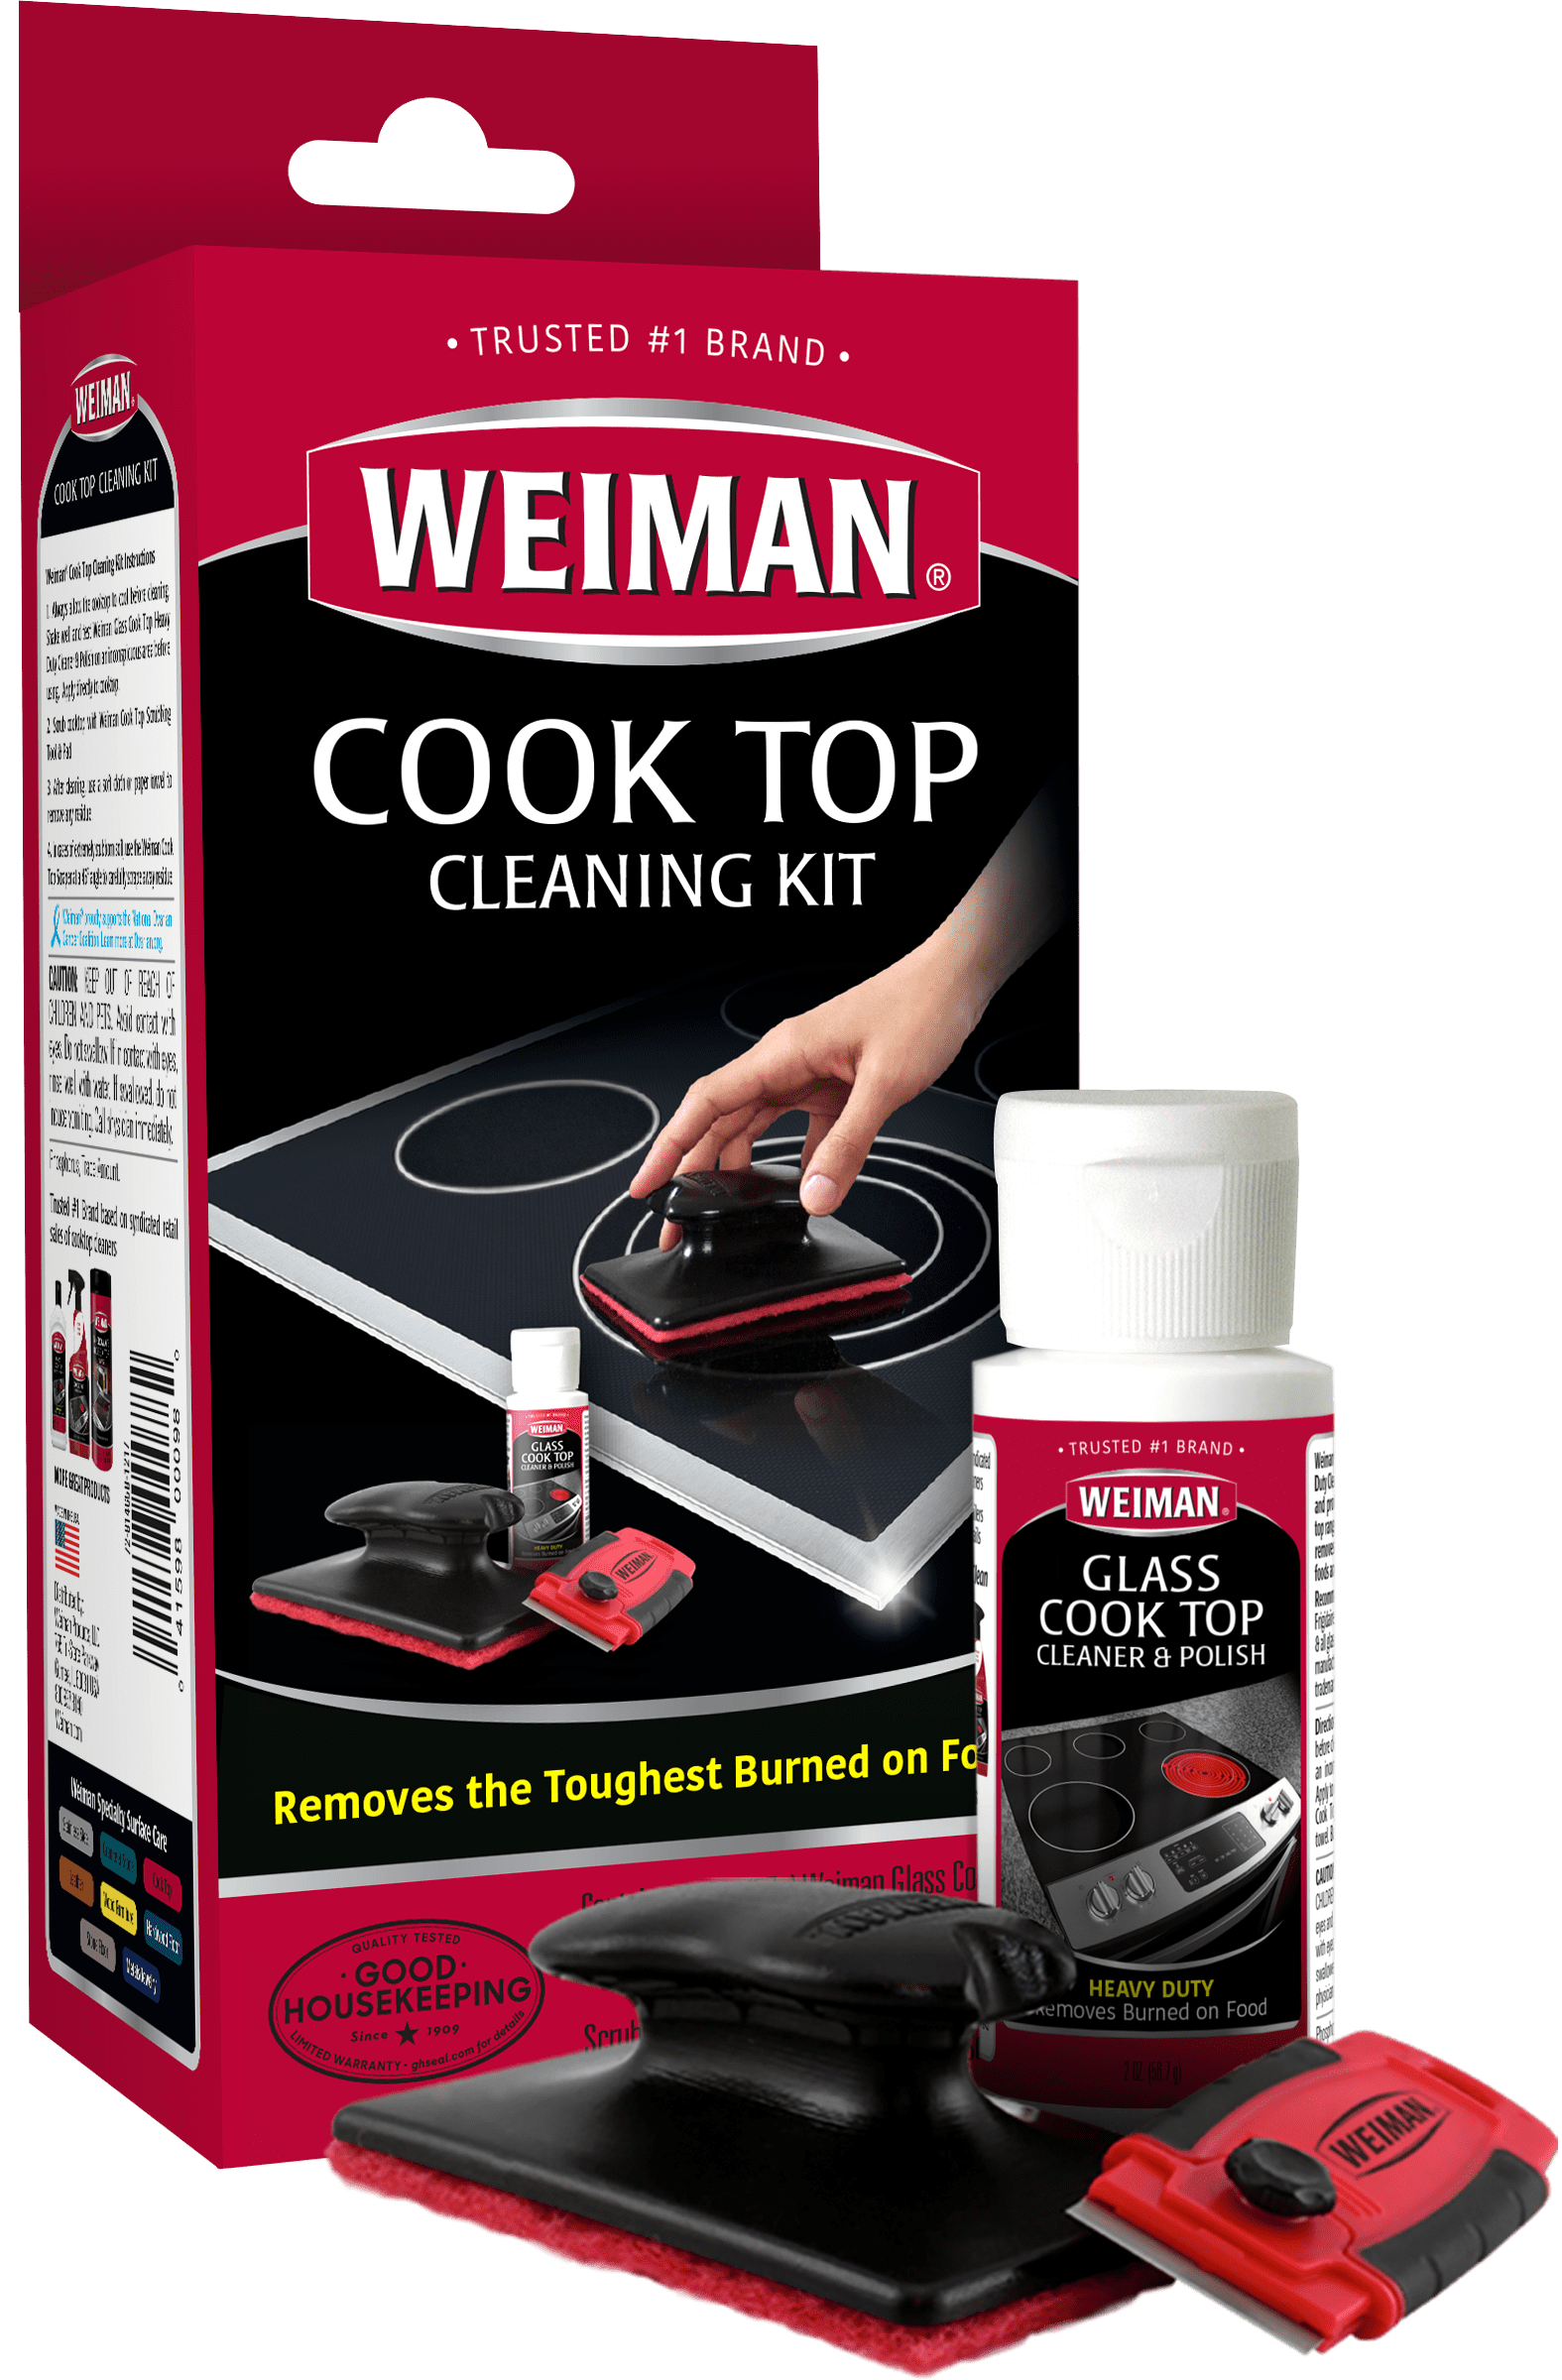 Weiman Cooktop and Stove Top Cleaner Kit - Glass Cook Top Cleaner and  Polish 10 oz. Scrubbing Pad, Cleaning Tool, Razor, Scraper